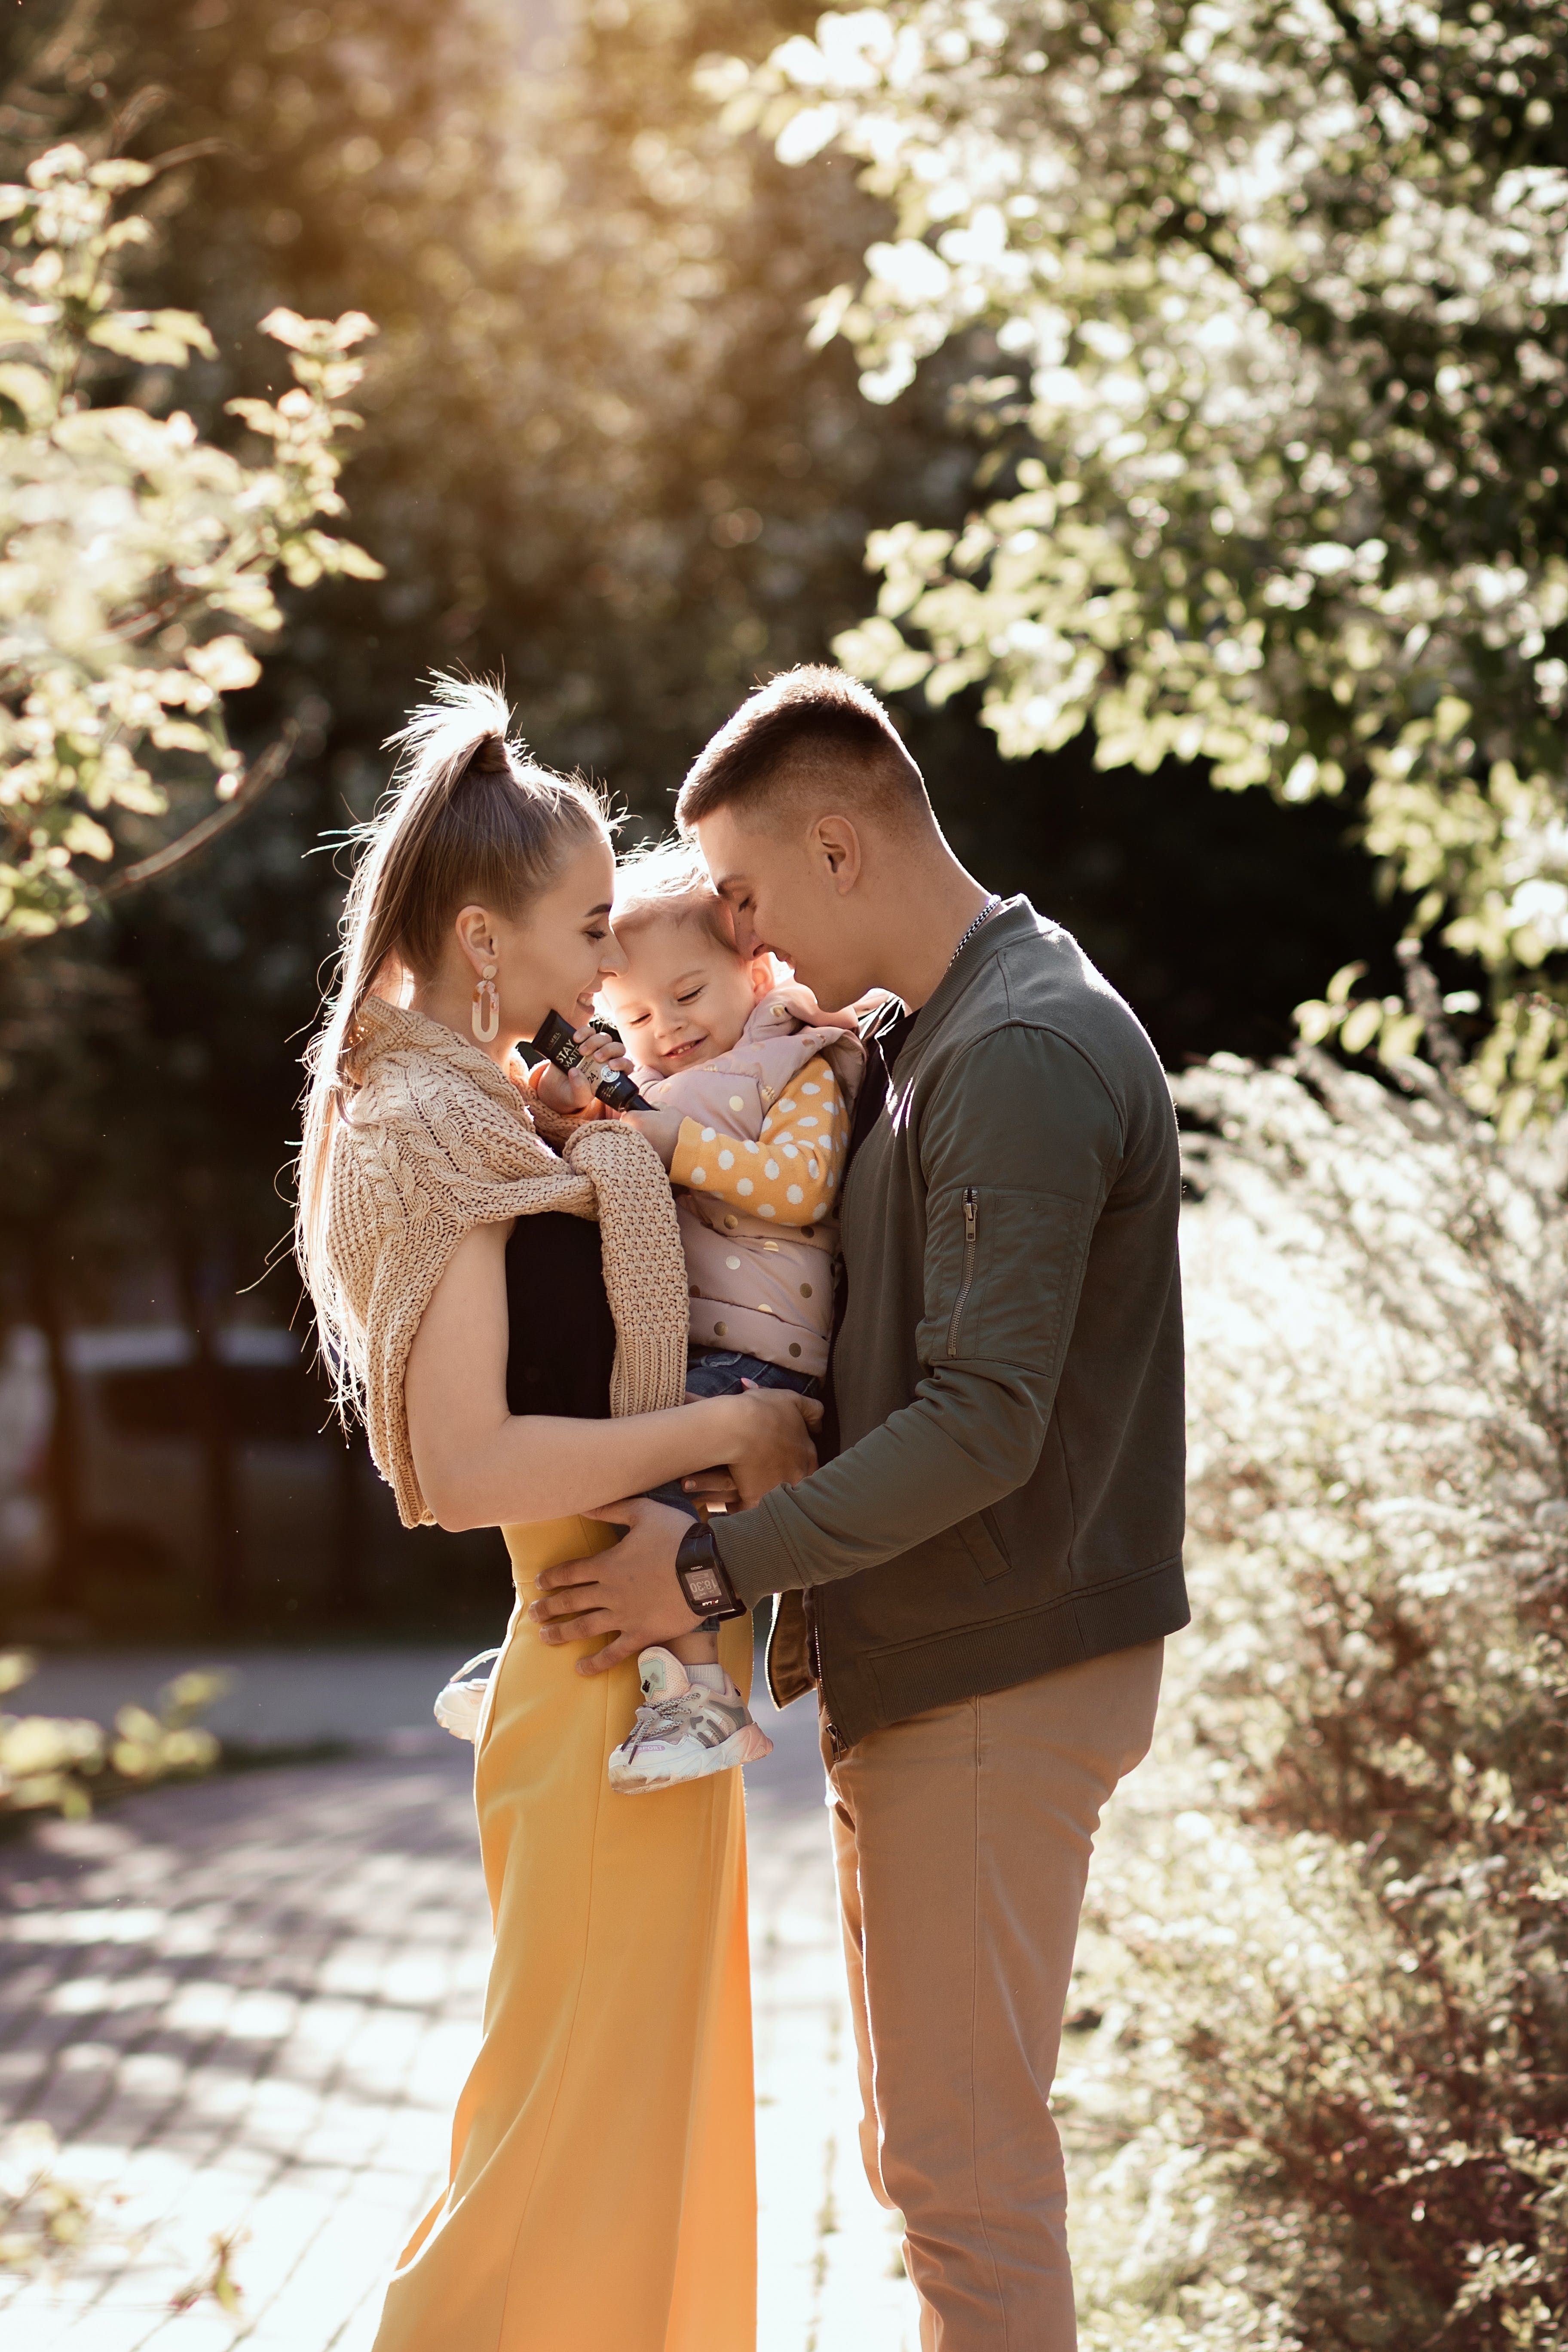 A couple holding their daughter. | Source: Pexels